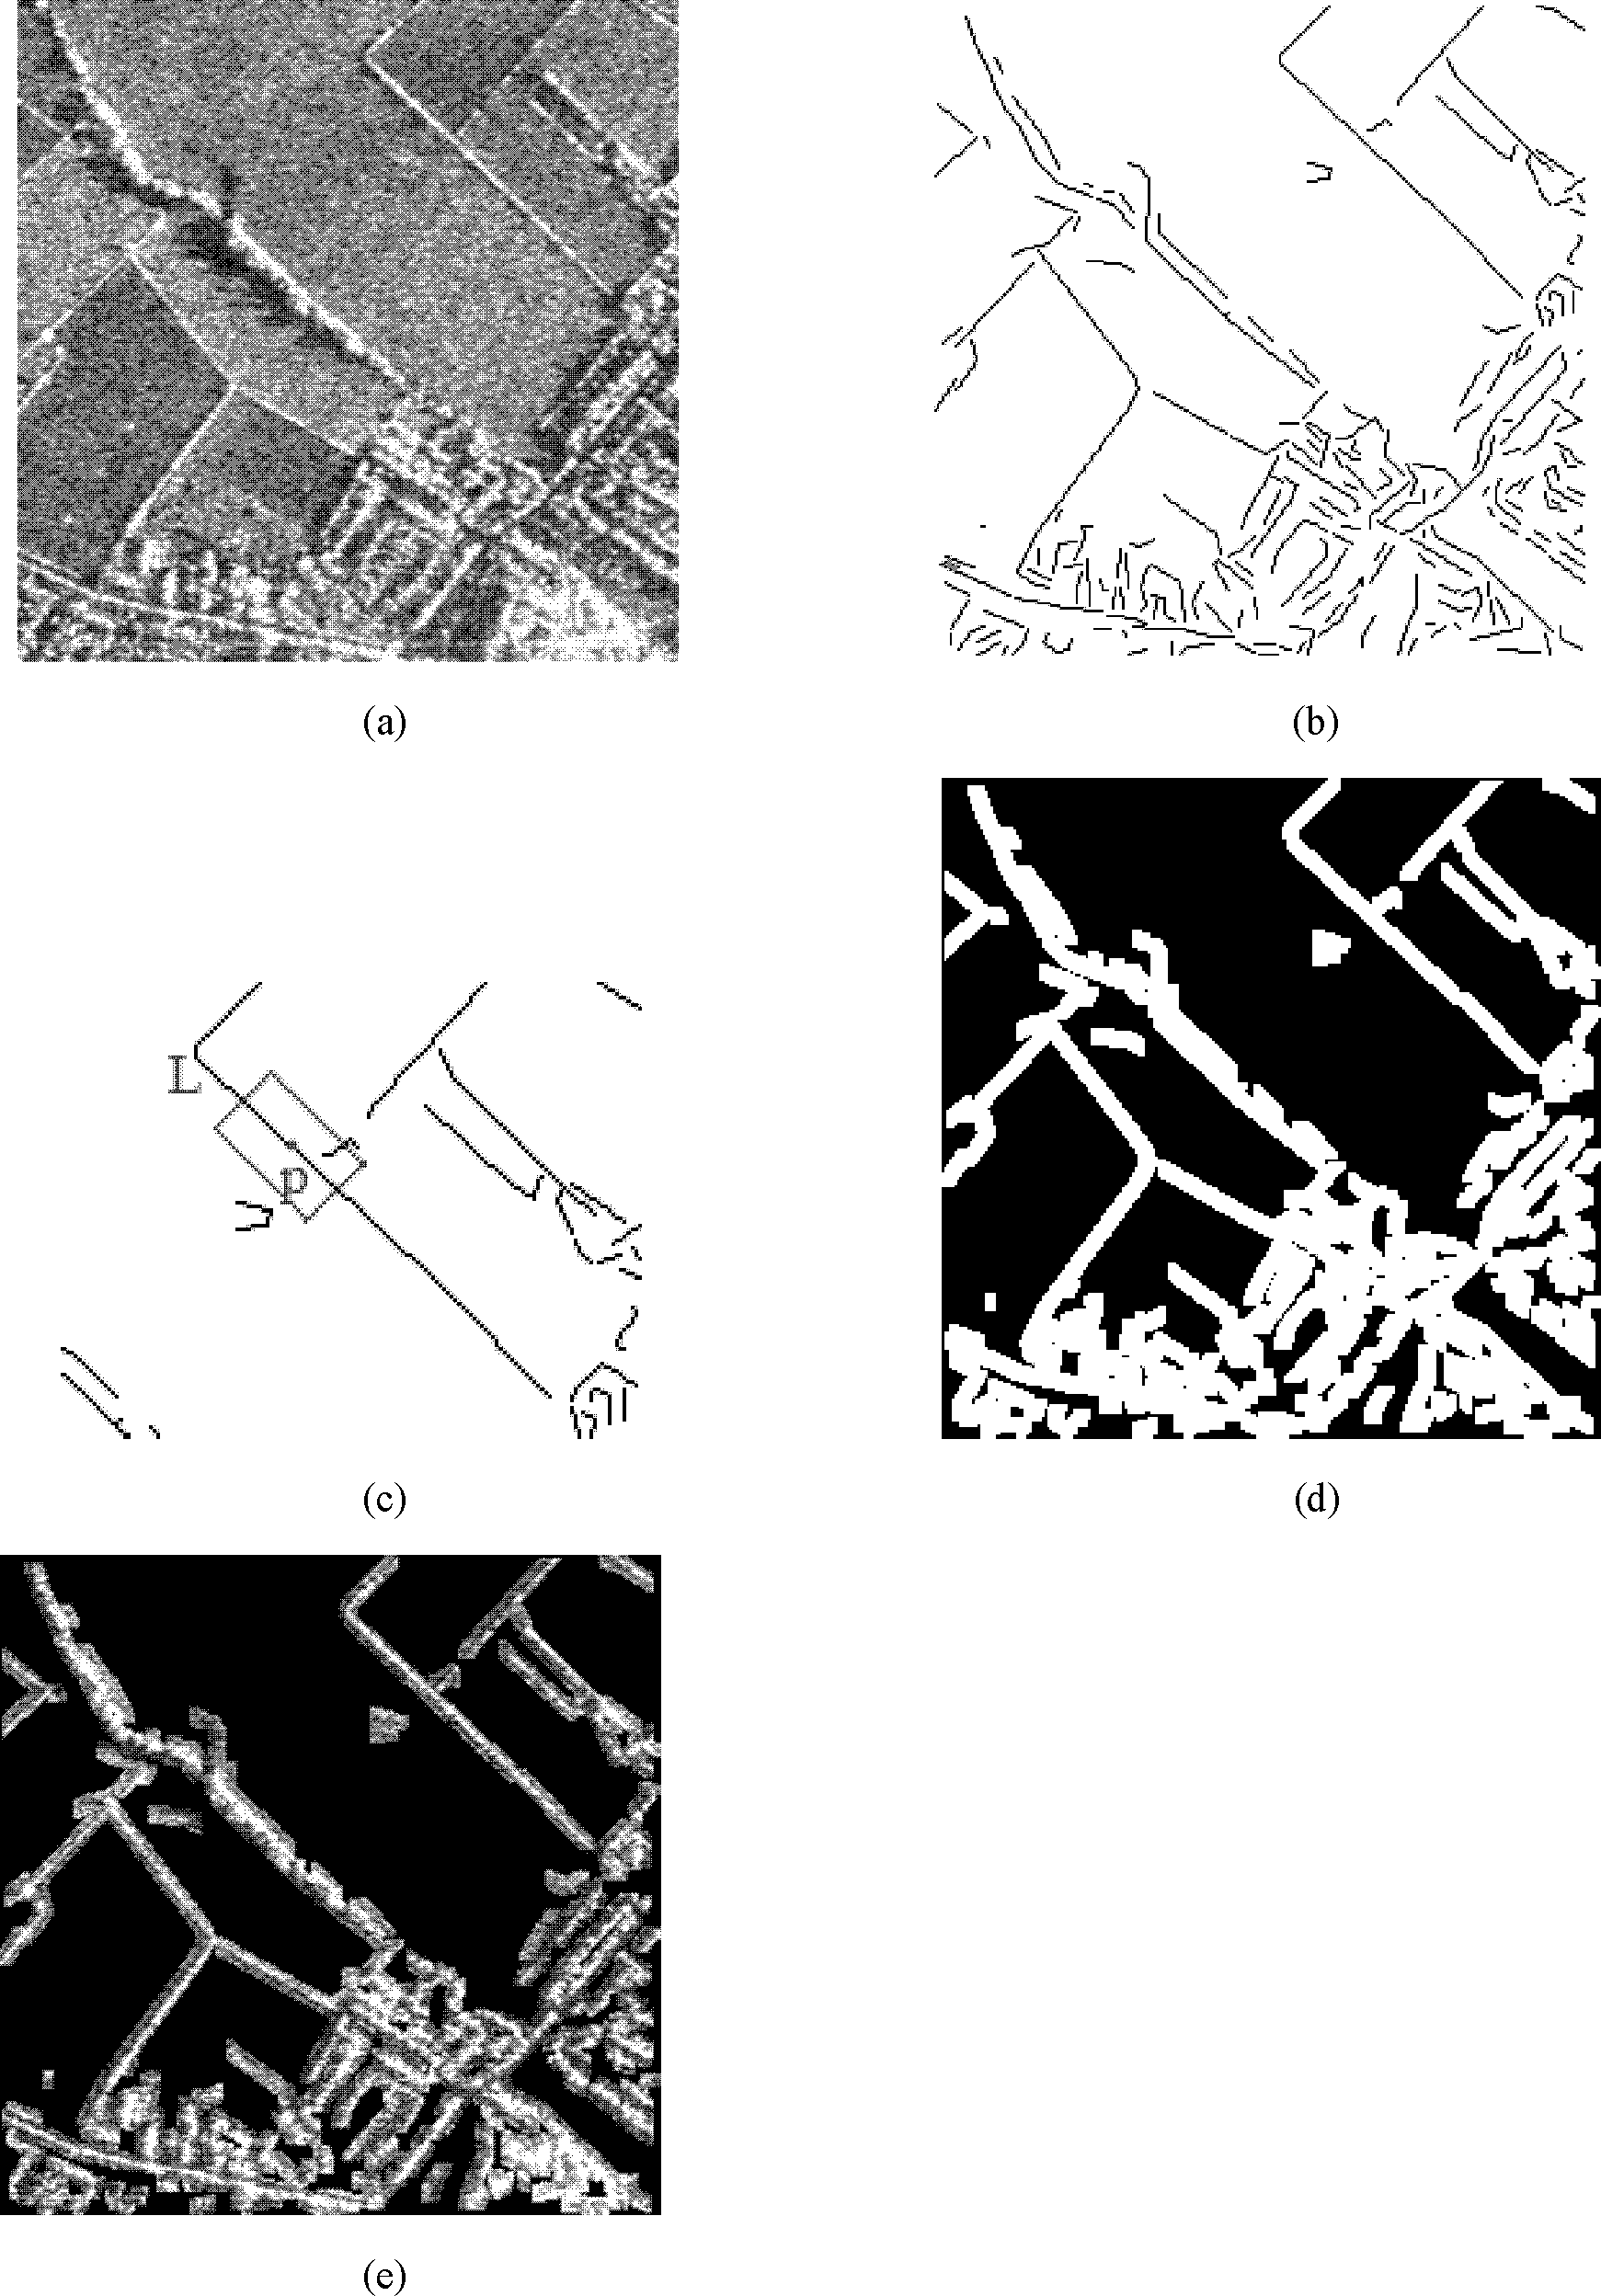 SAR image speckle suppression based on area division and non-local total variation